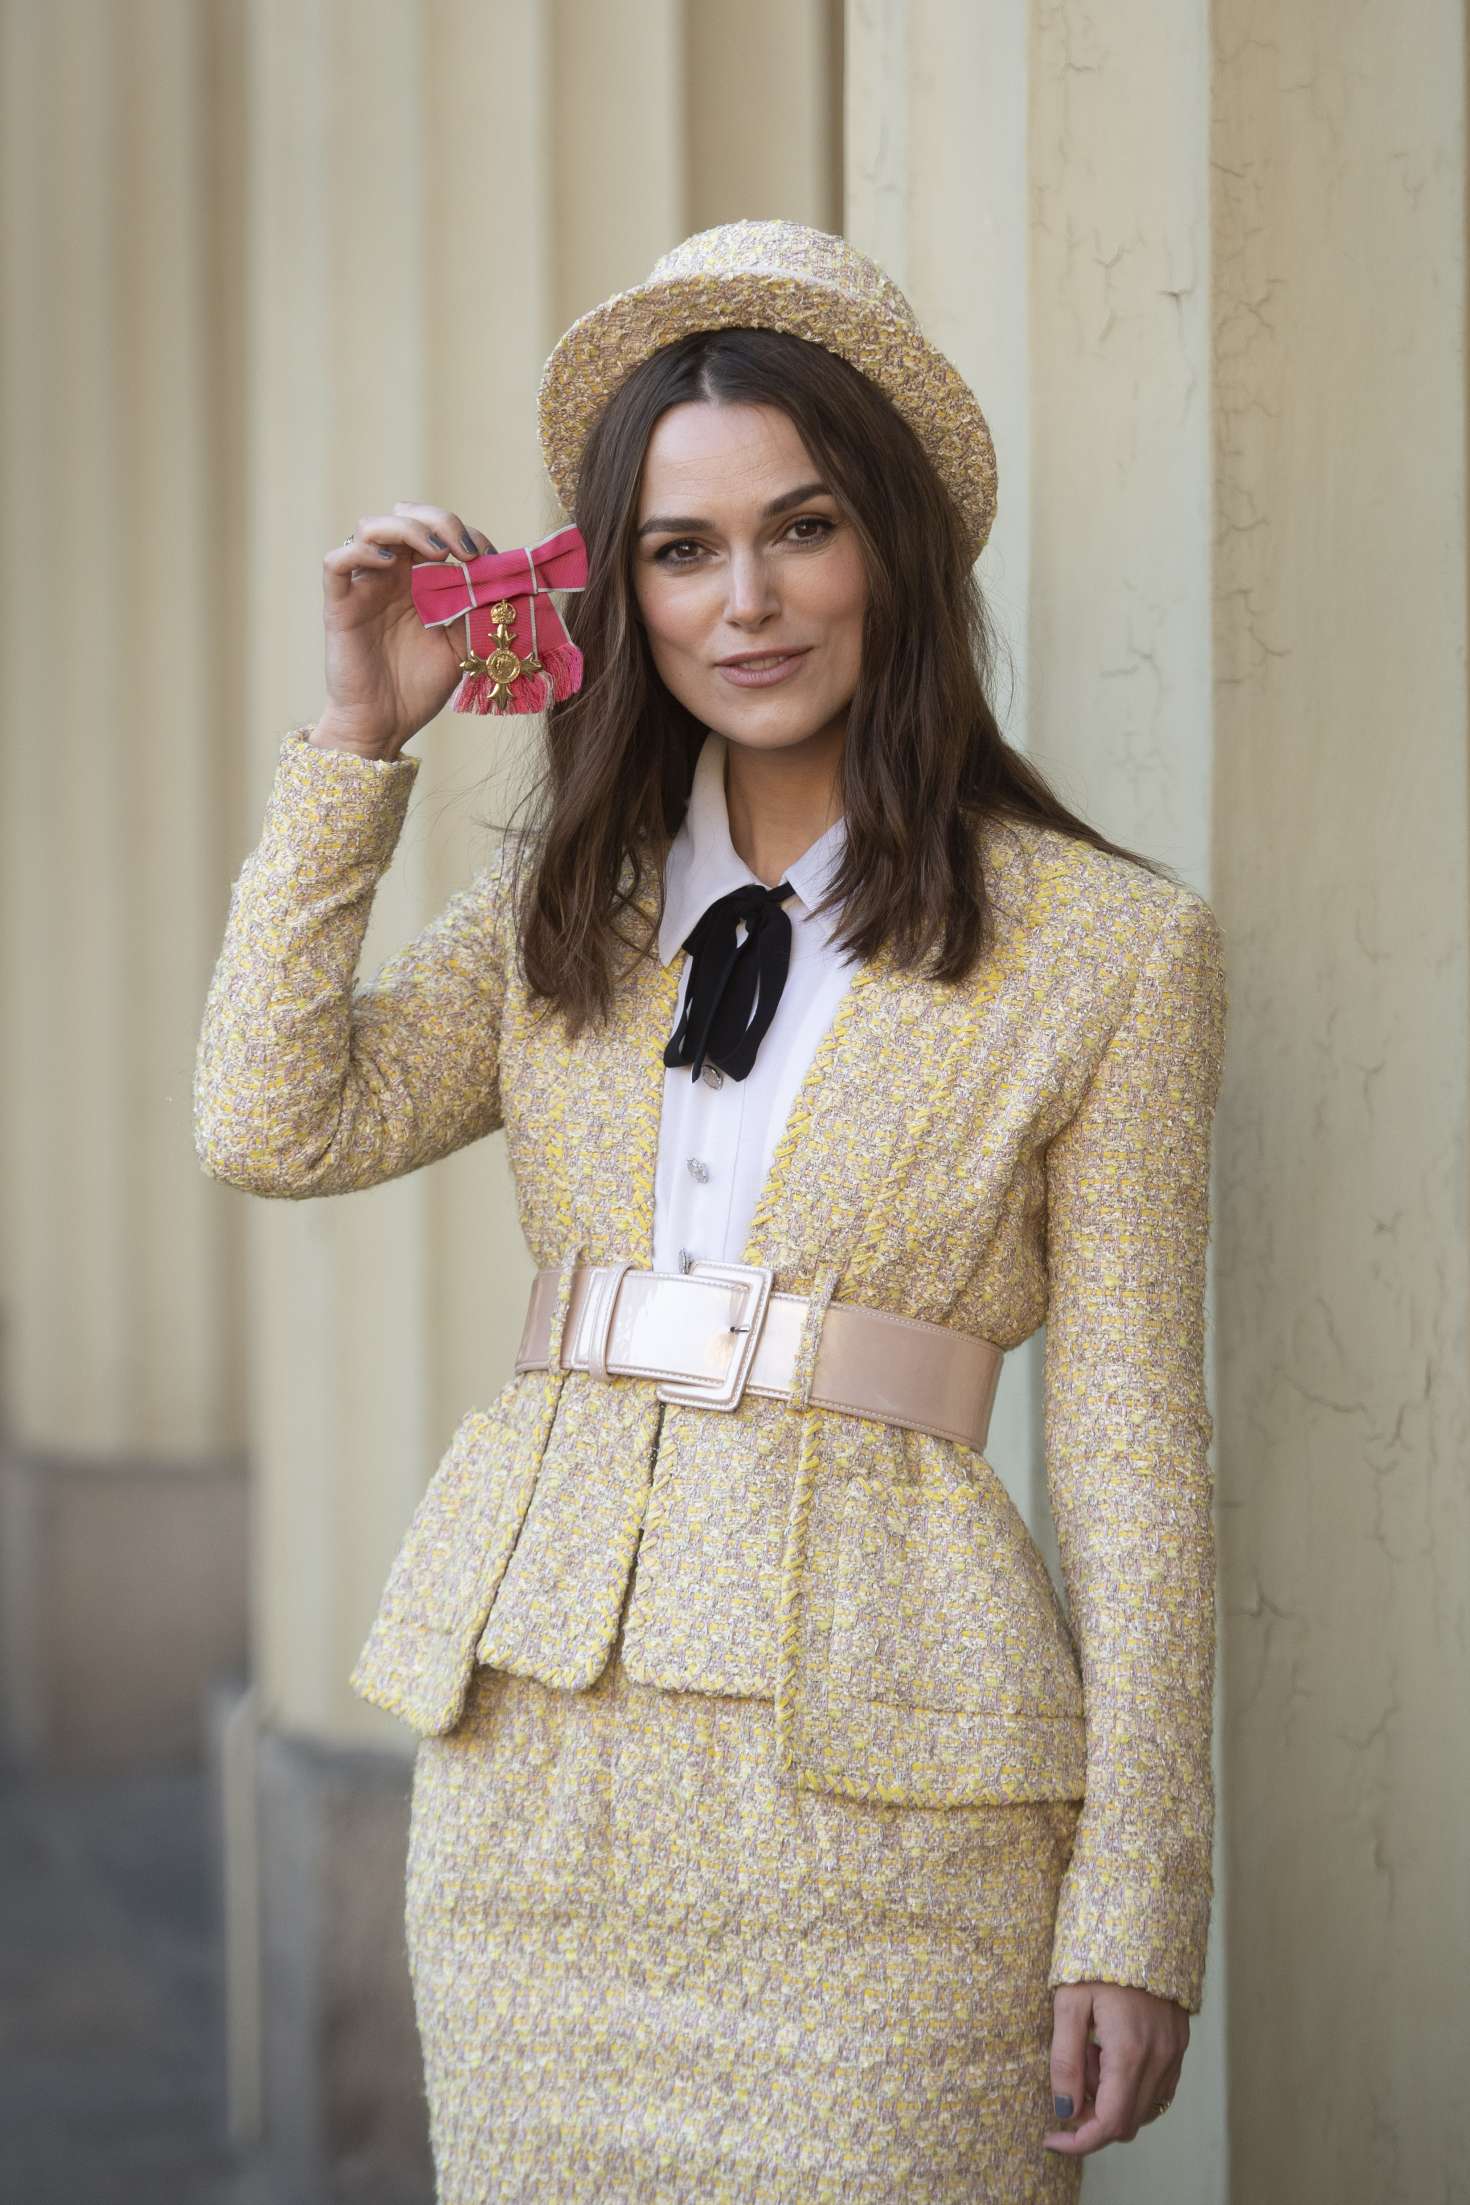 Keira Knightley â€“ Investiture at Buckingham Palace in London